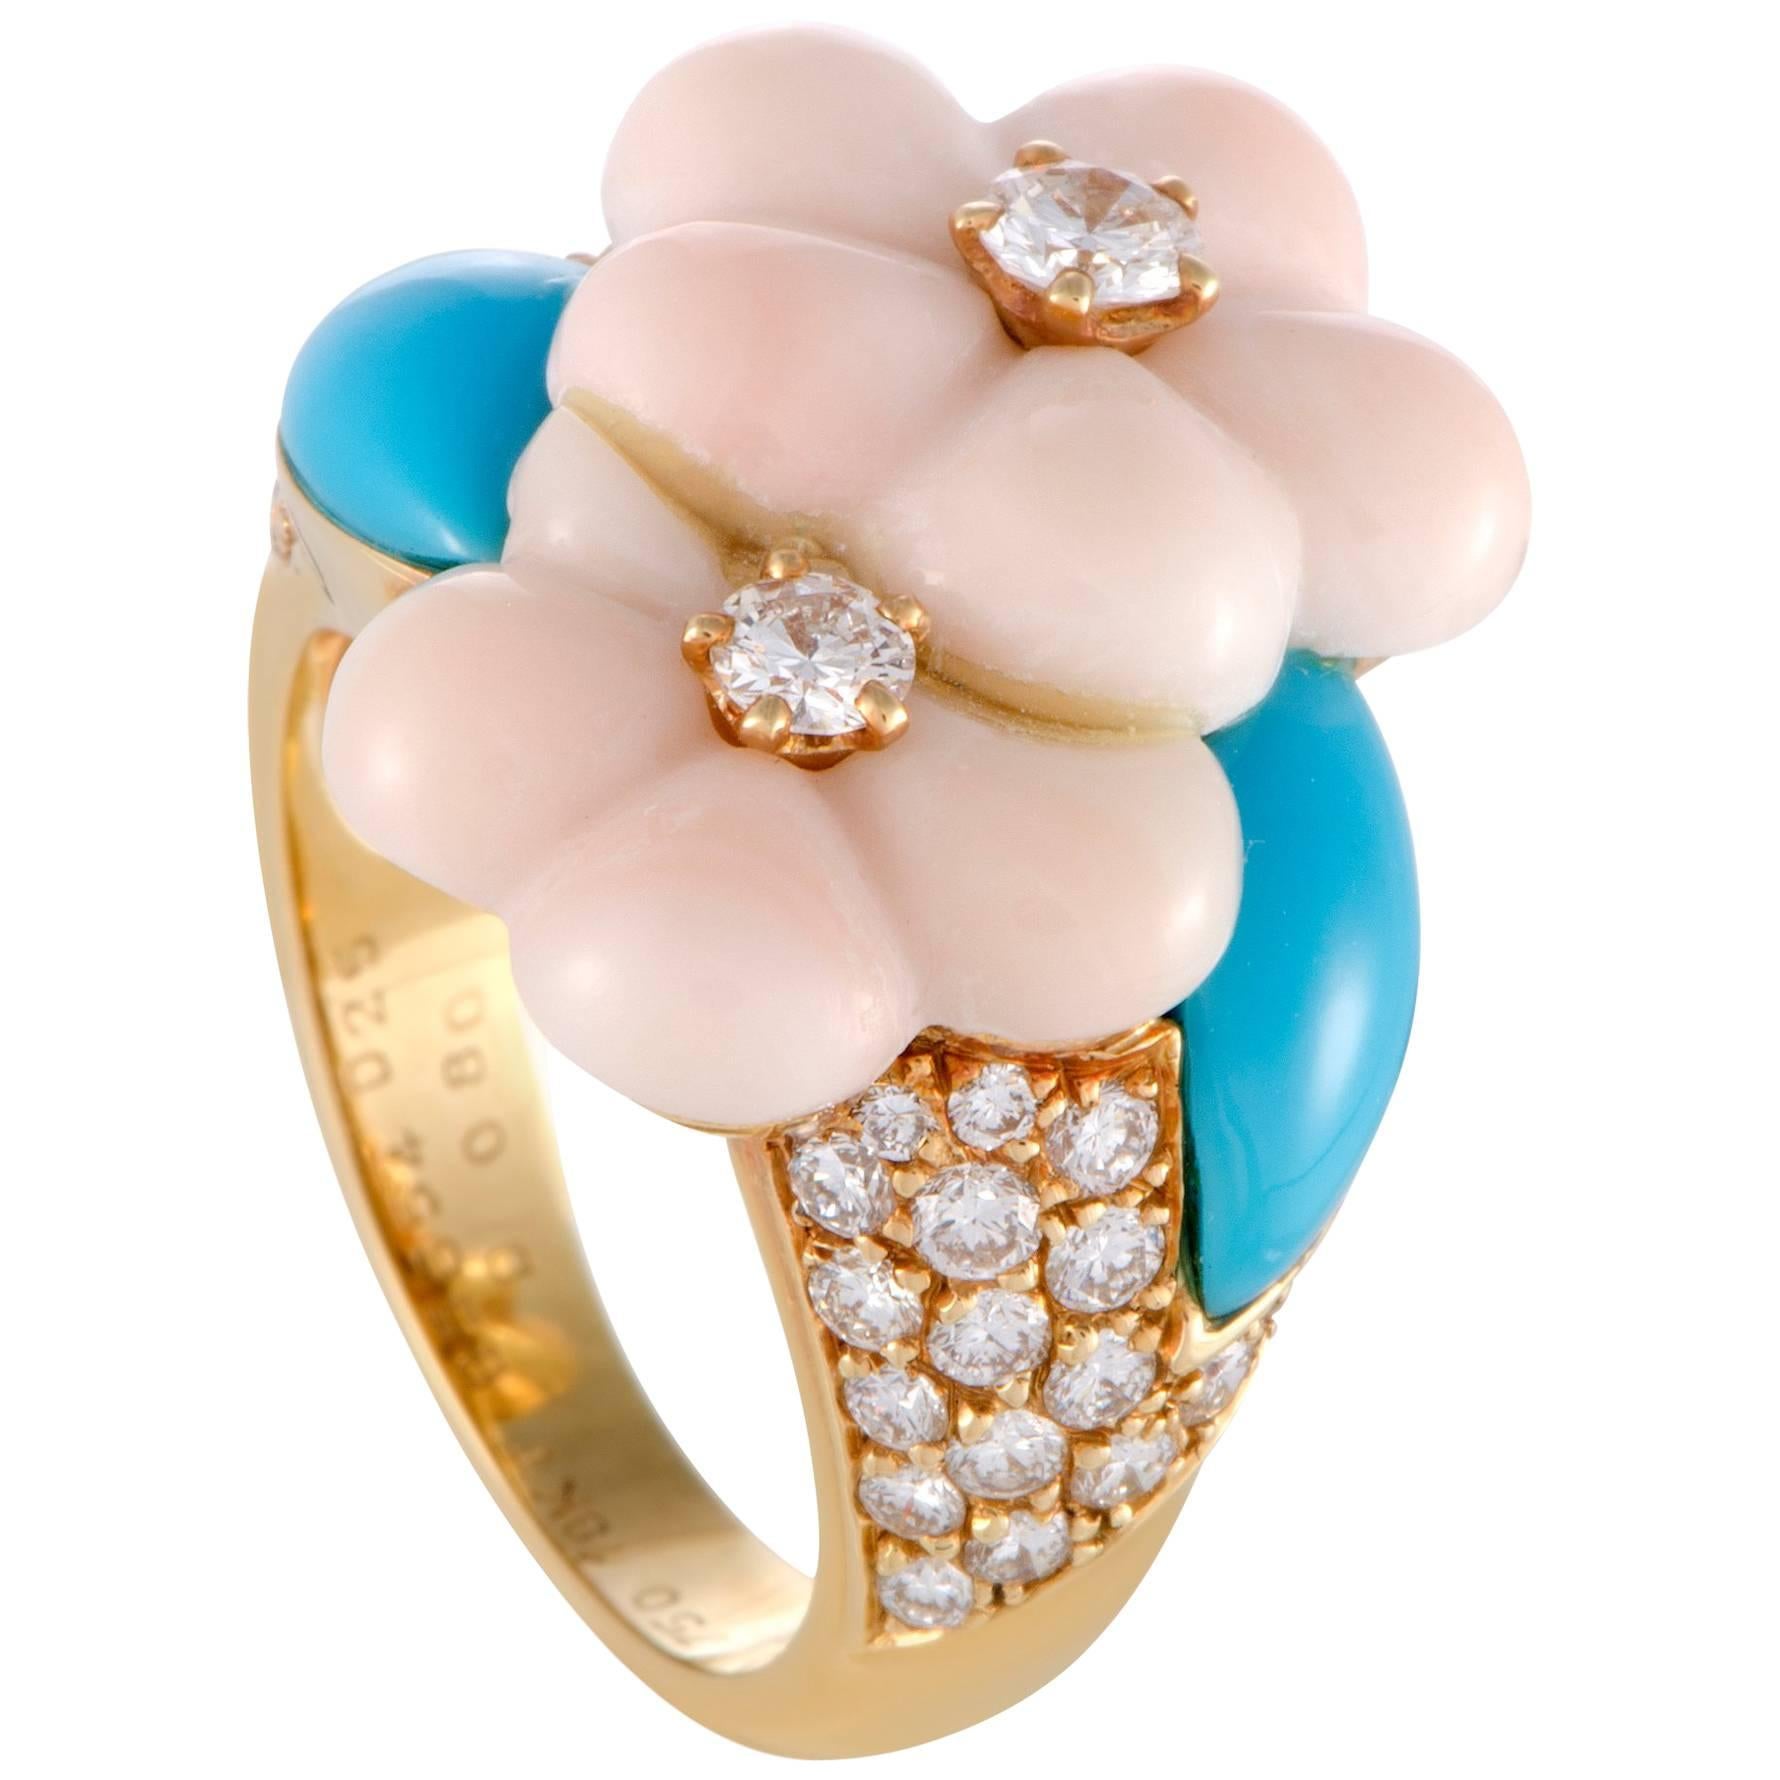 Van Cleef & Arpels Diamond Coral and Turquoise Yellow Gold Ring